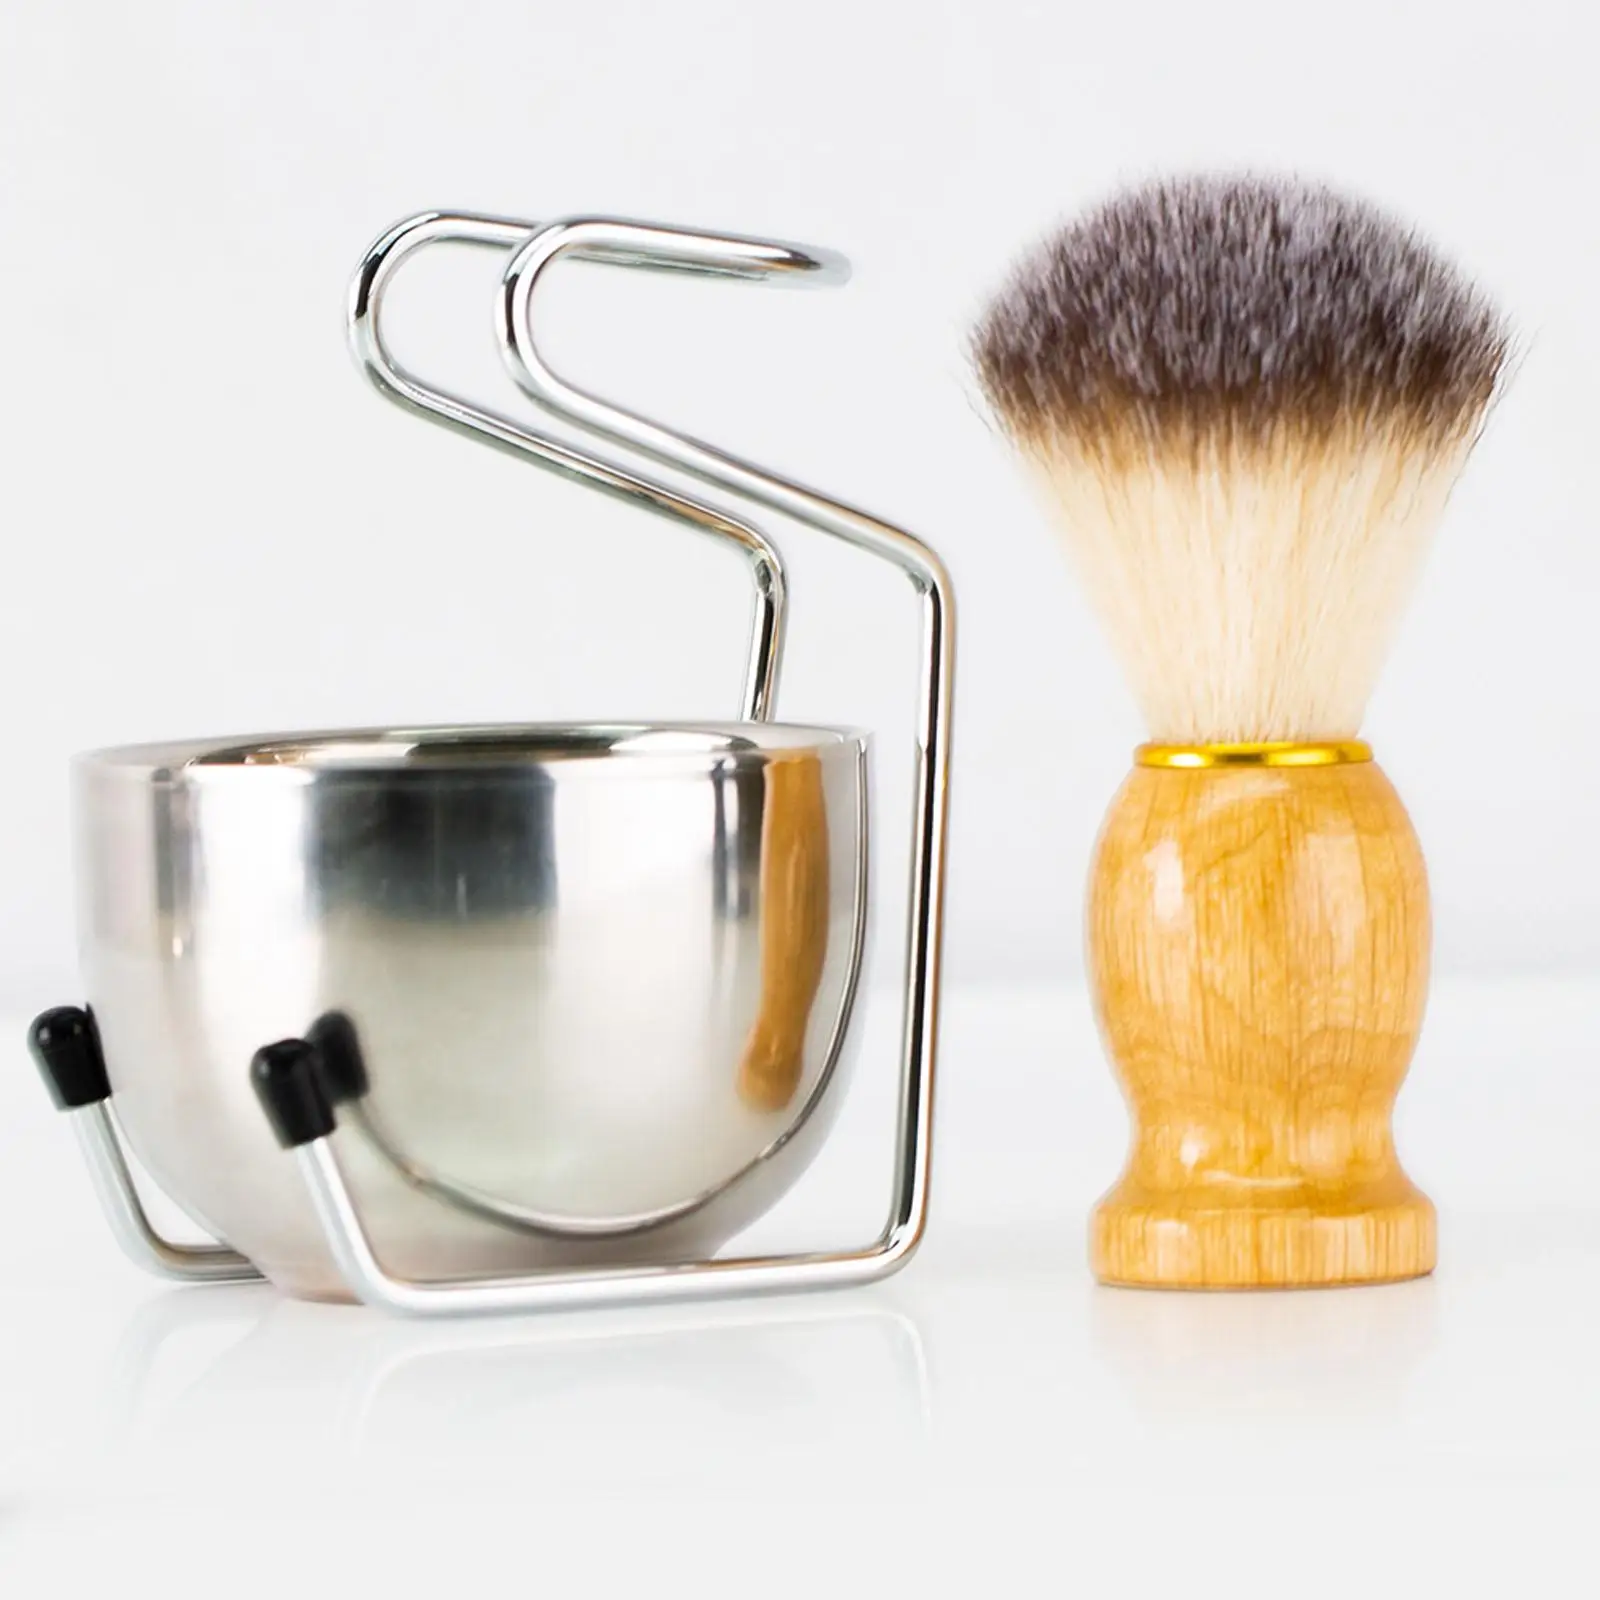 3 in 1 Wet Shaving Kit with Shave Brush Stand Mug, Hair Shaving Brushes Wood Handle Easy Carry Professional Durable Gift Premium